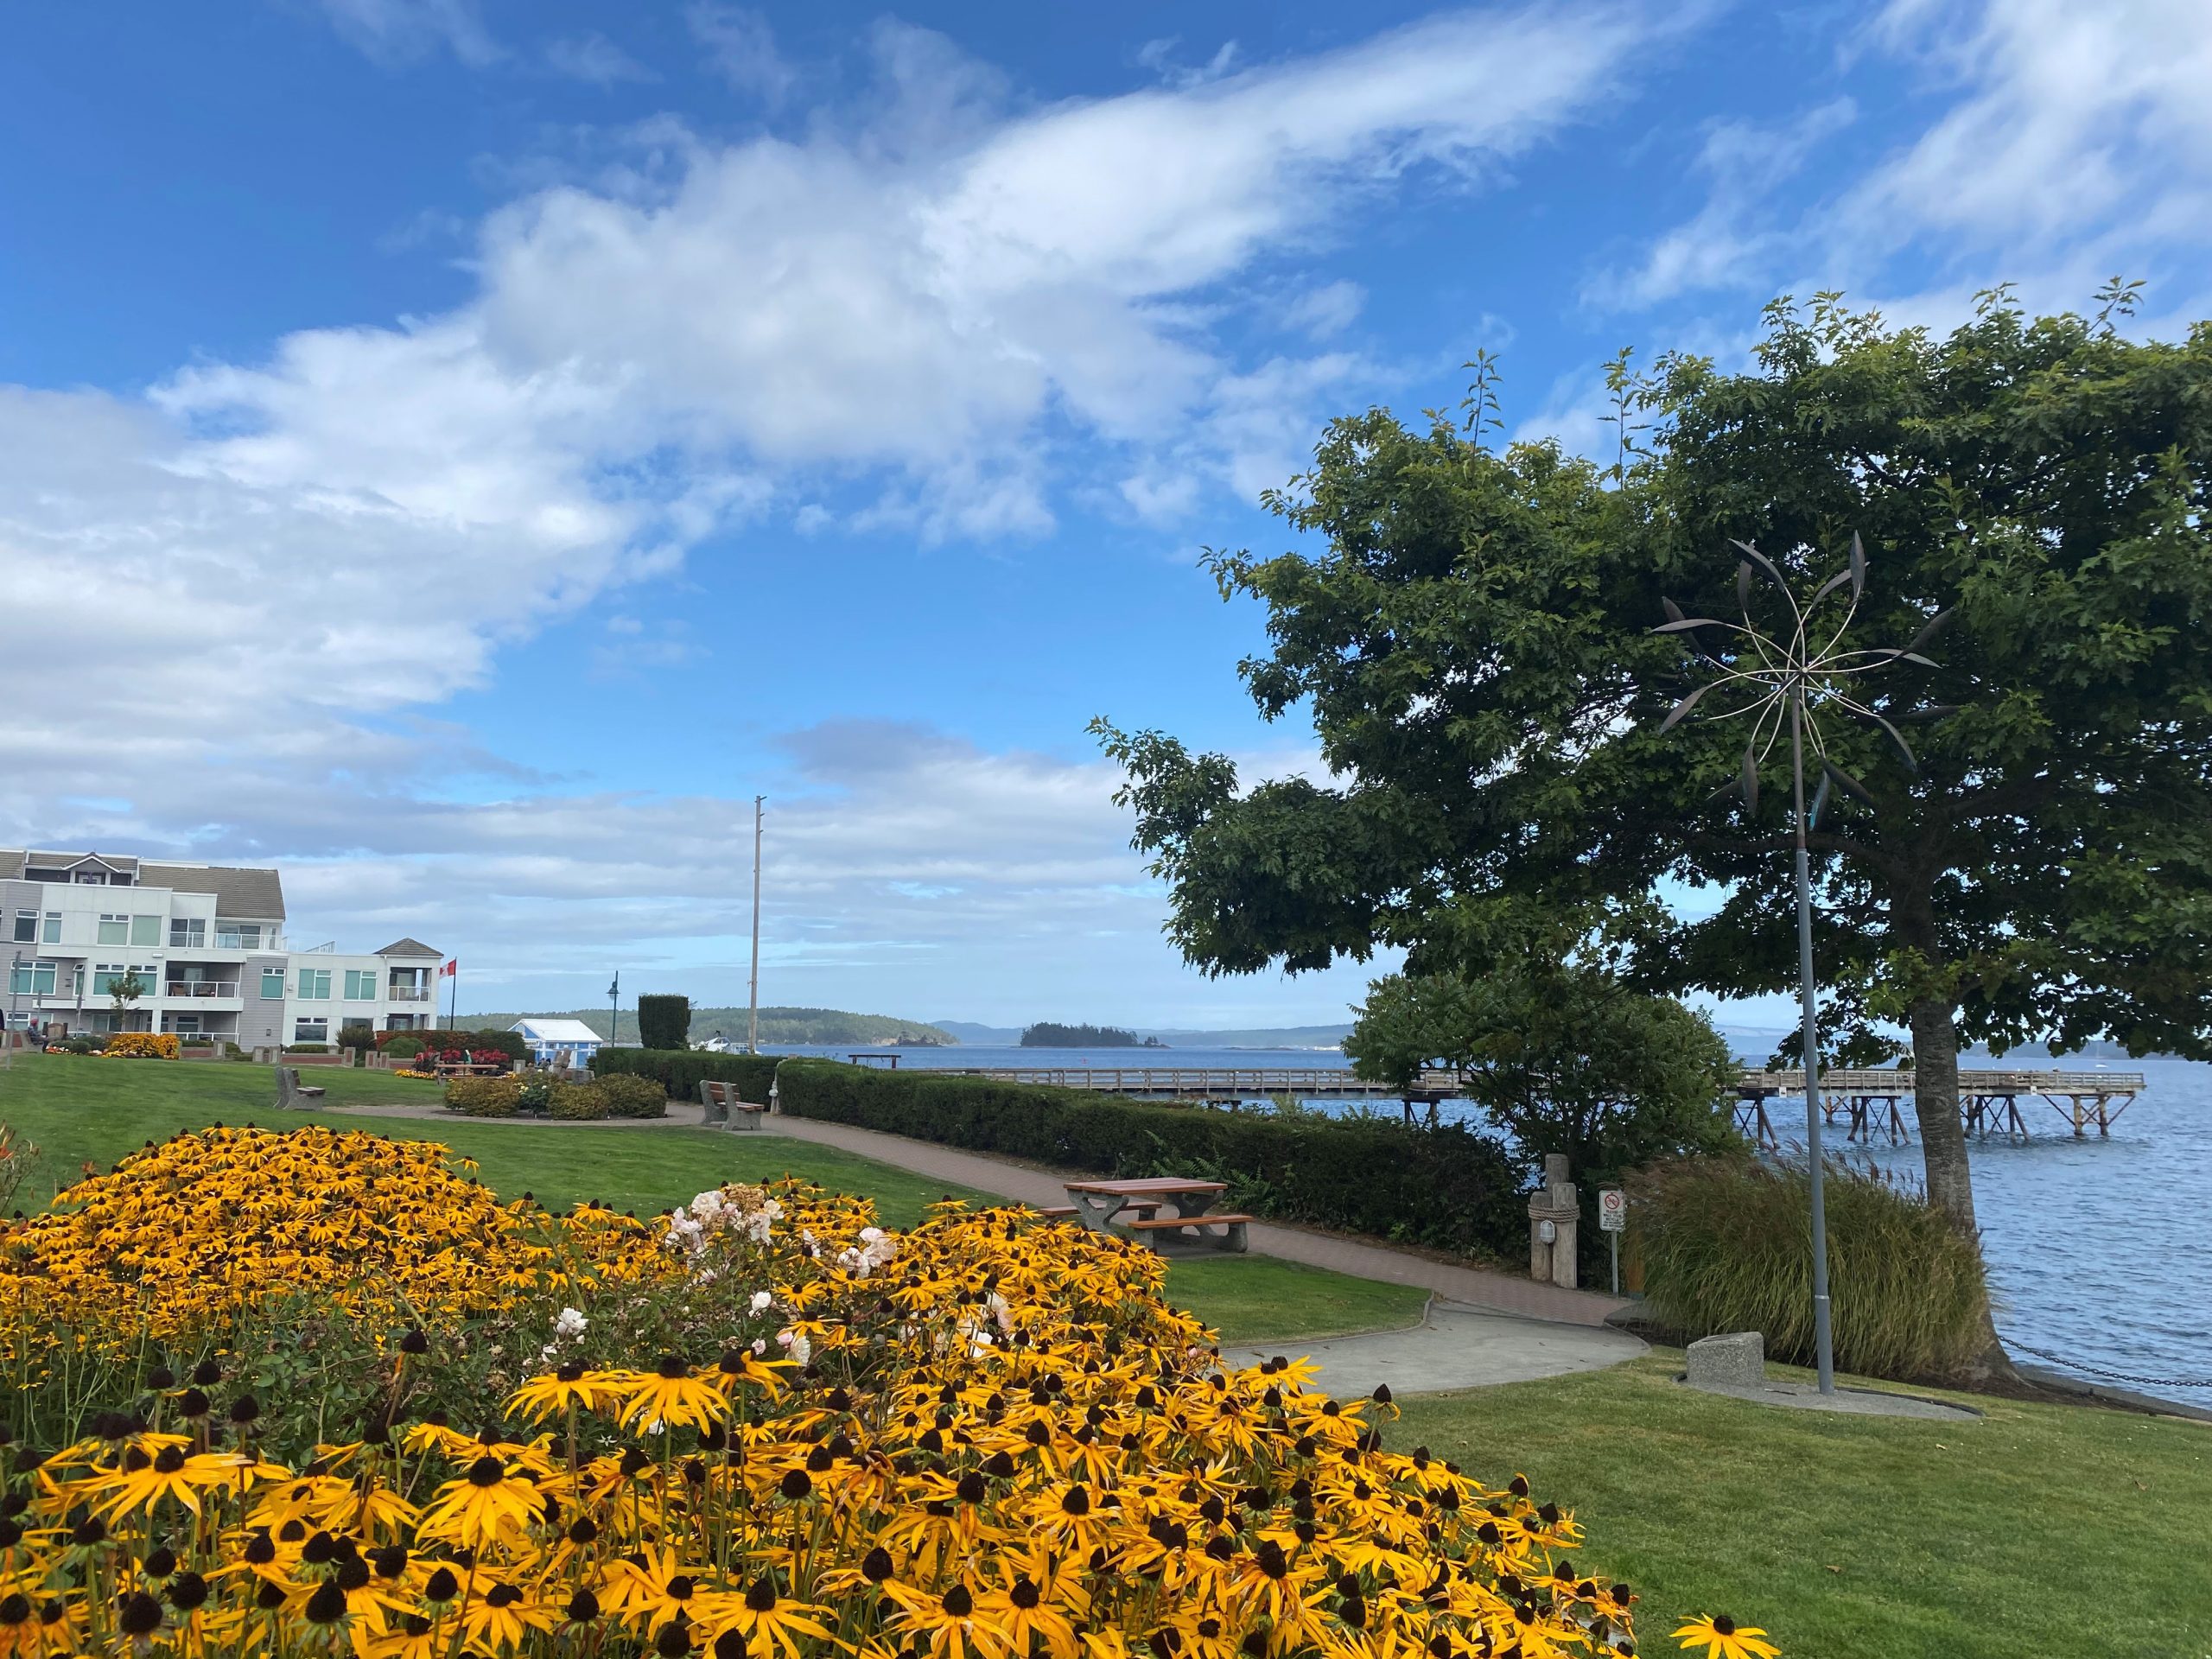 Image of yellow flowers in Eastview Park, in front of a picnic table and pathway, with the Bevan Fishing Pier in the background